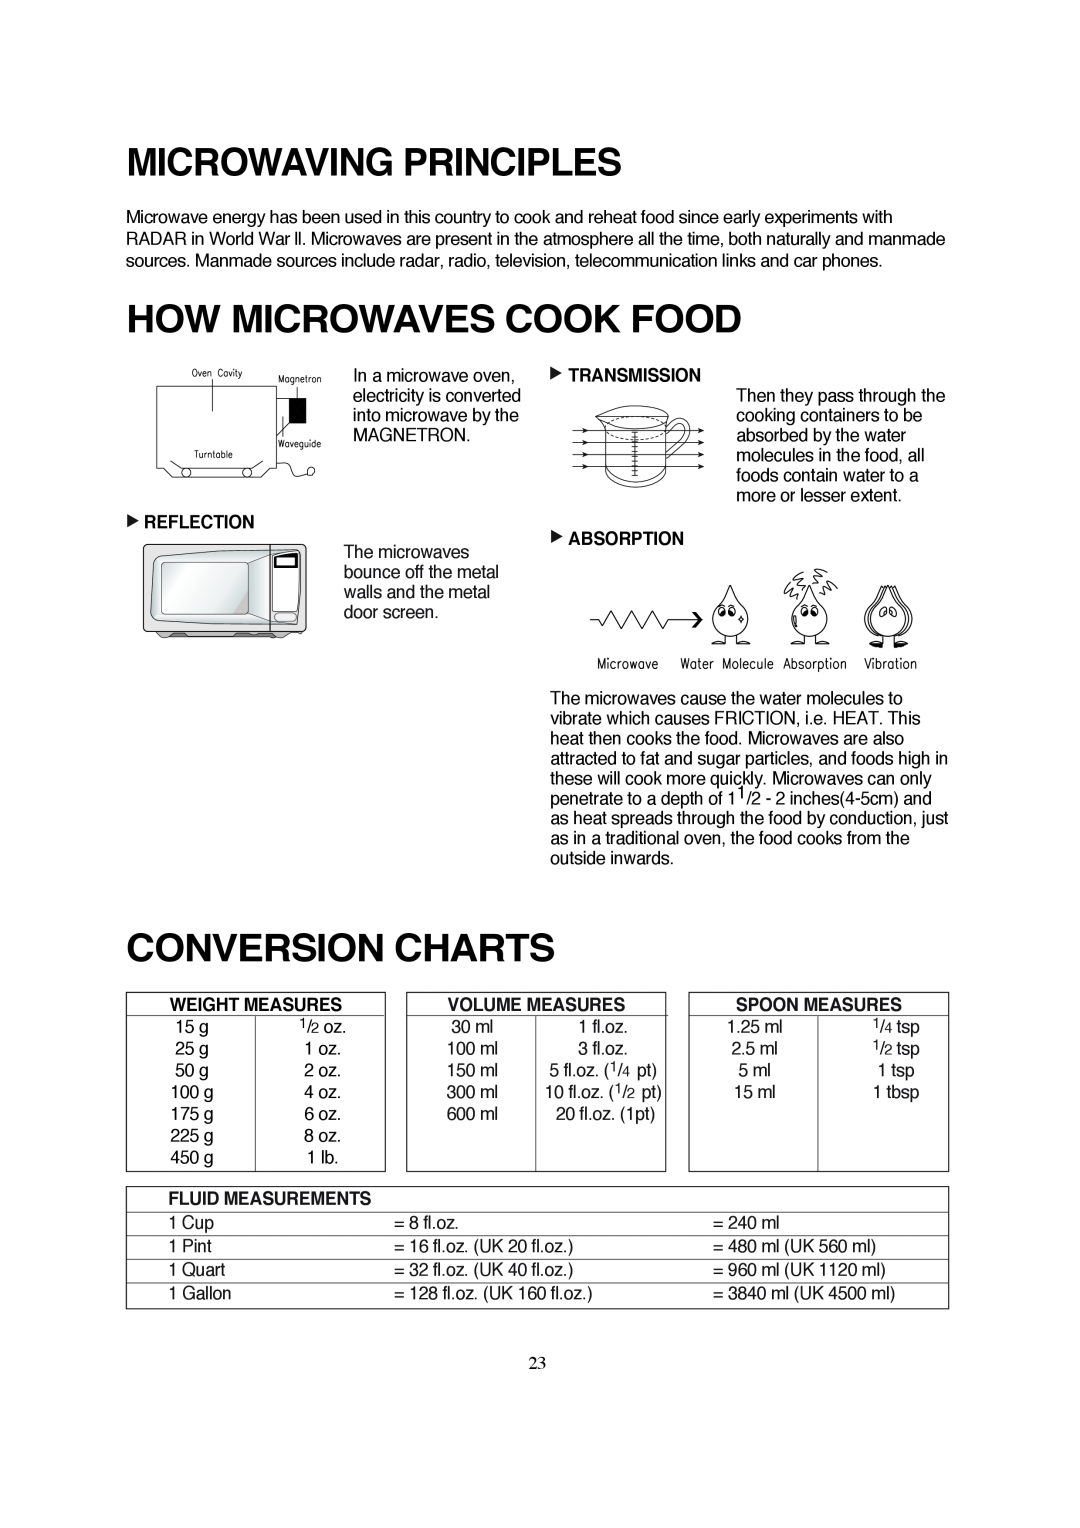 Magic Chef MCD990ARB Microwaving Principles, How Microwaves Cook Food, Conversion Charts, Reflection, Weight Measures 